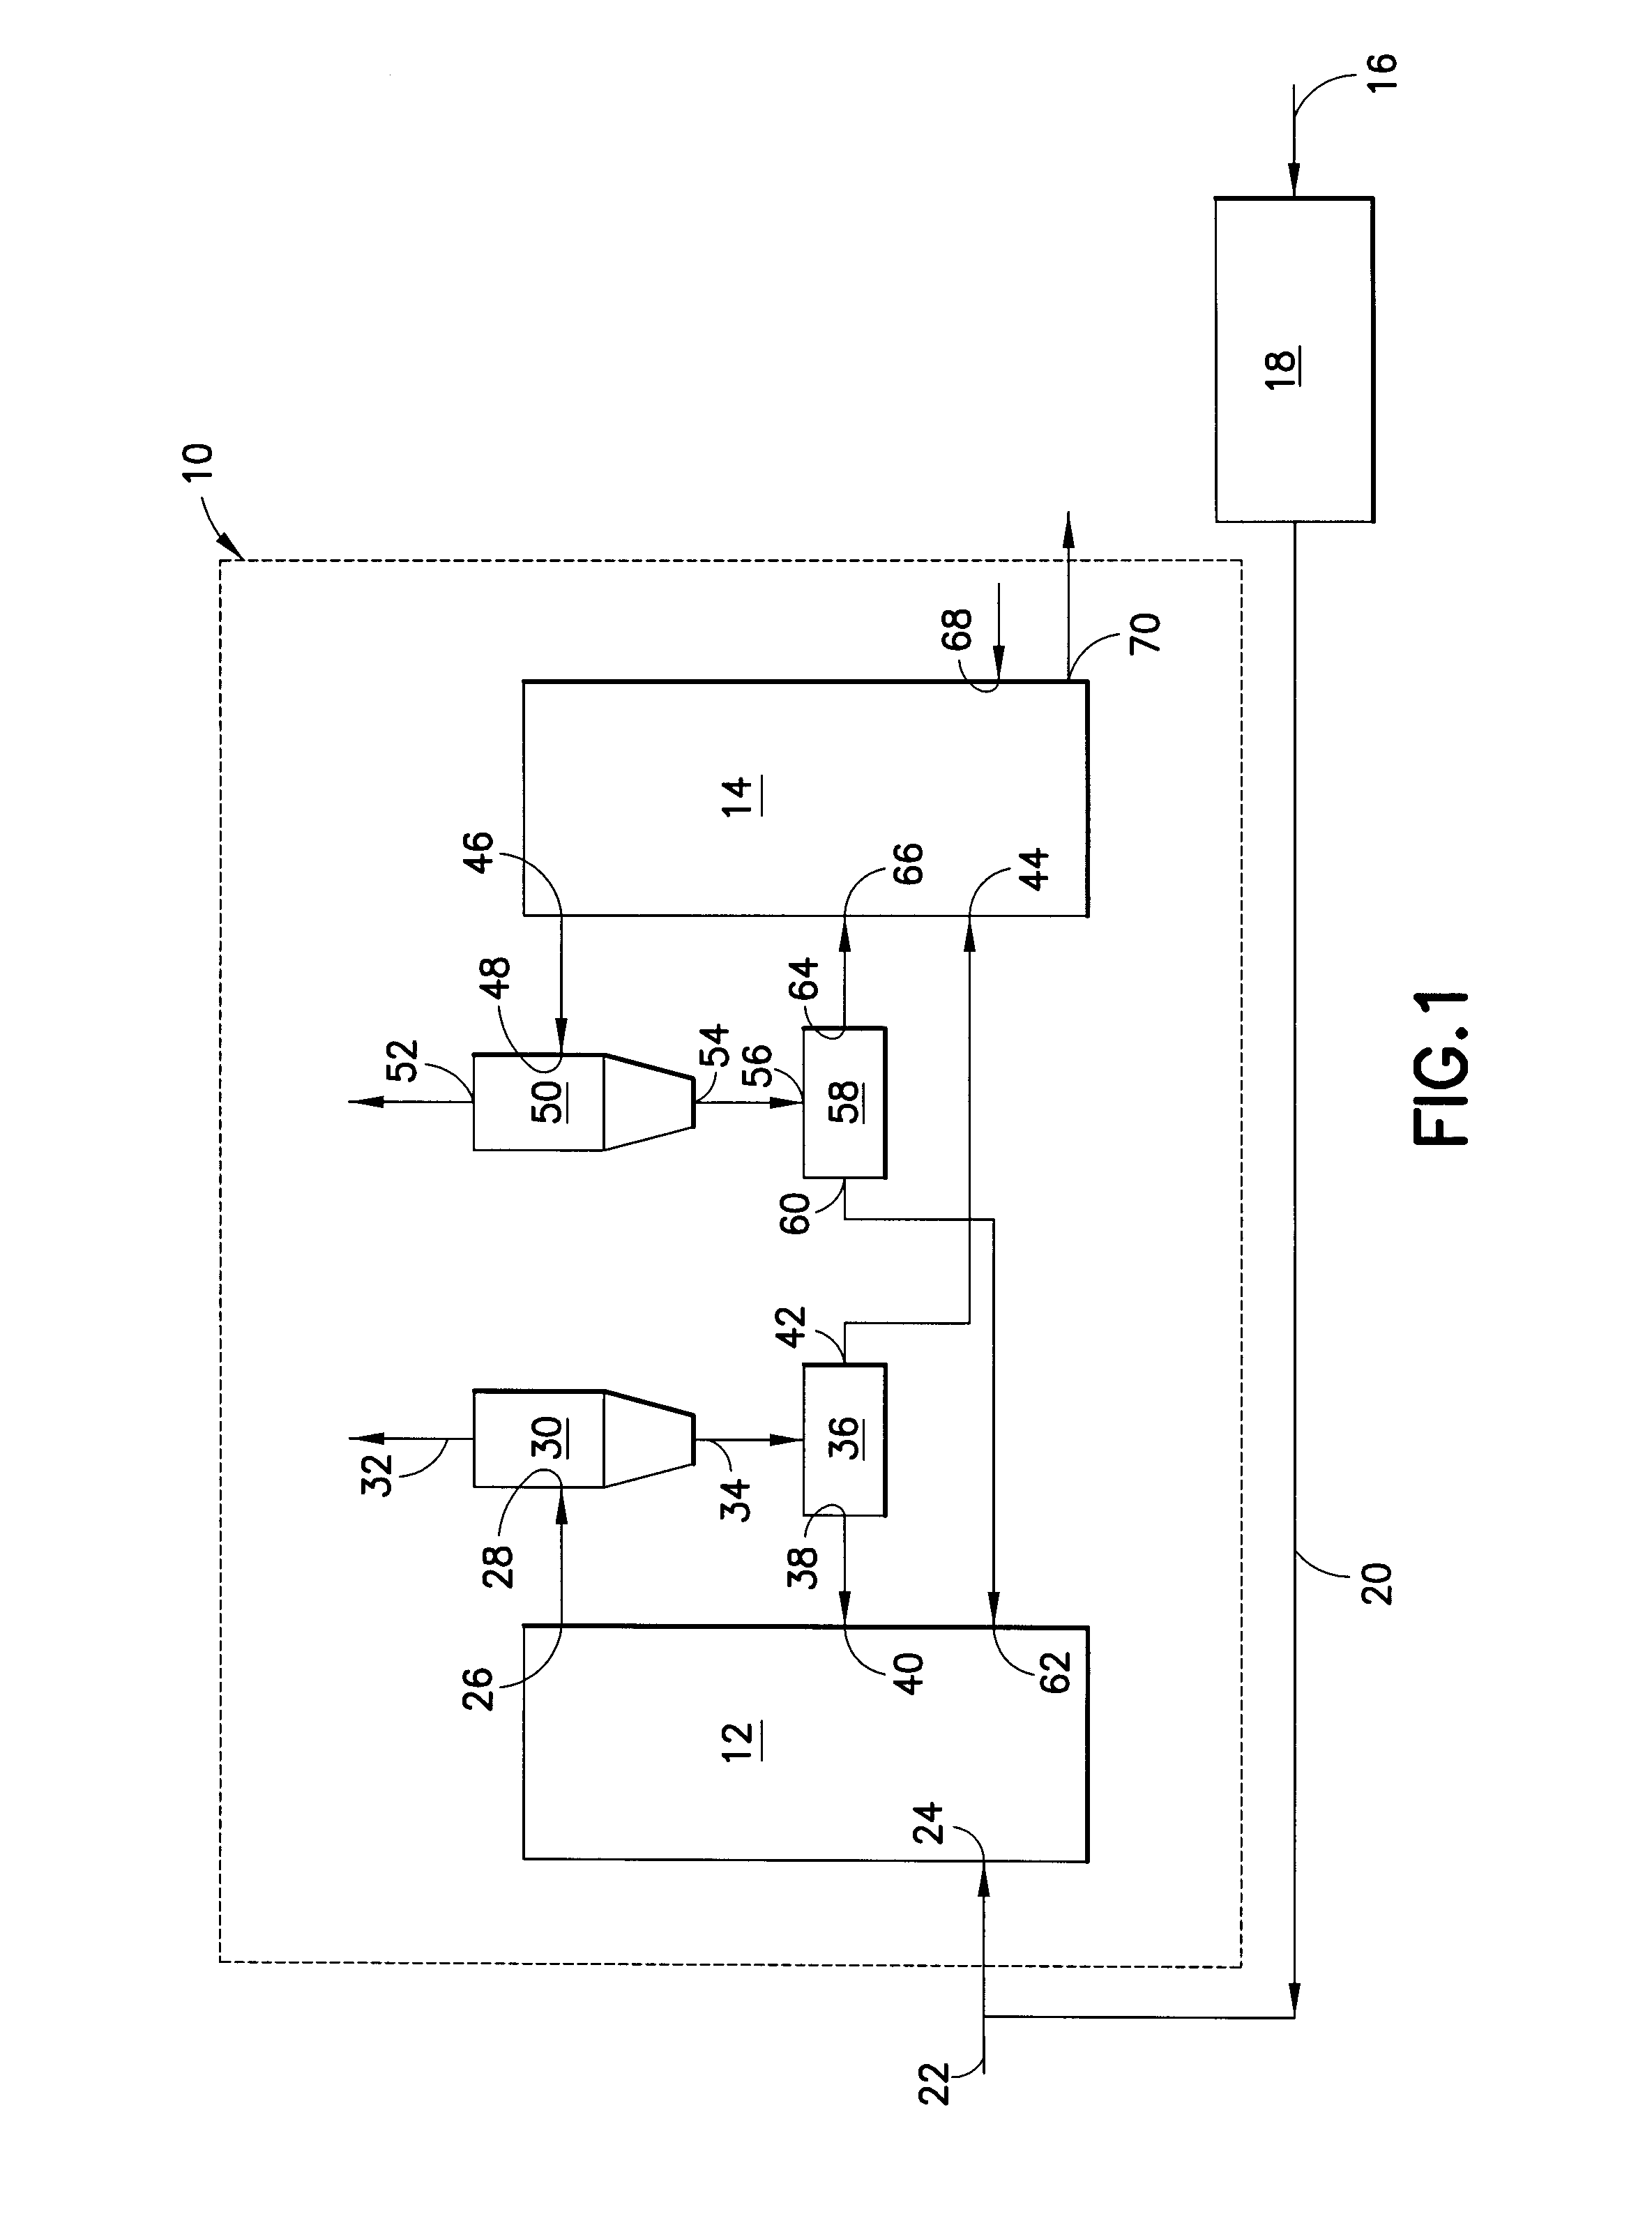 System for hot solids combustion and gasification